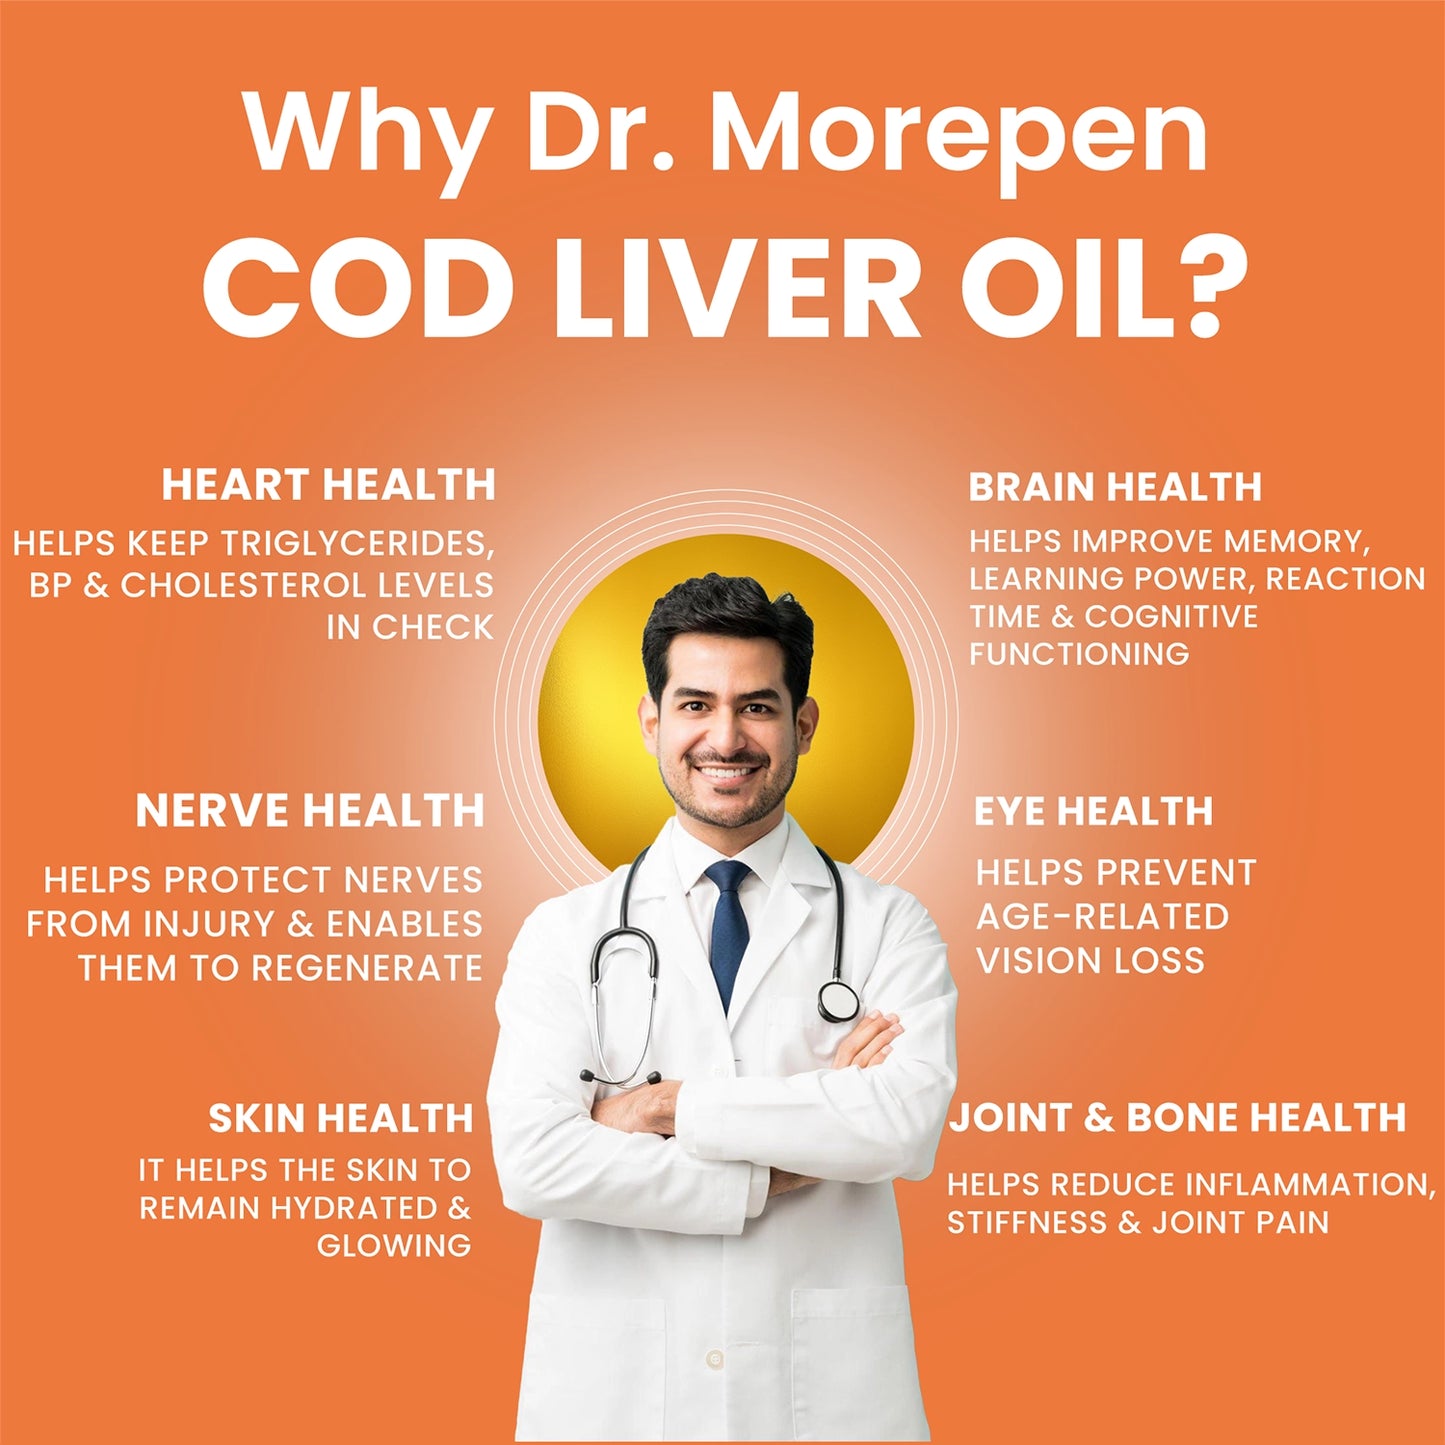 Cod Liver Oil Capsules pack of 2